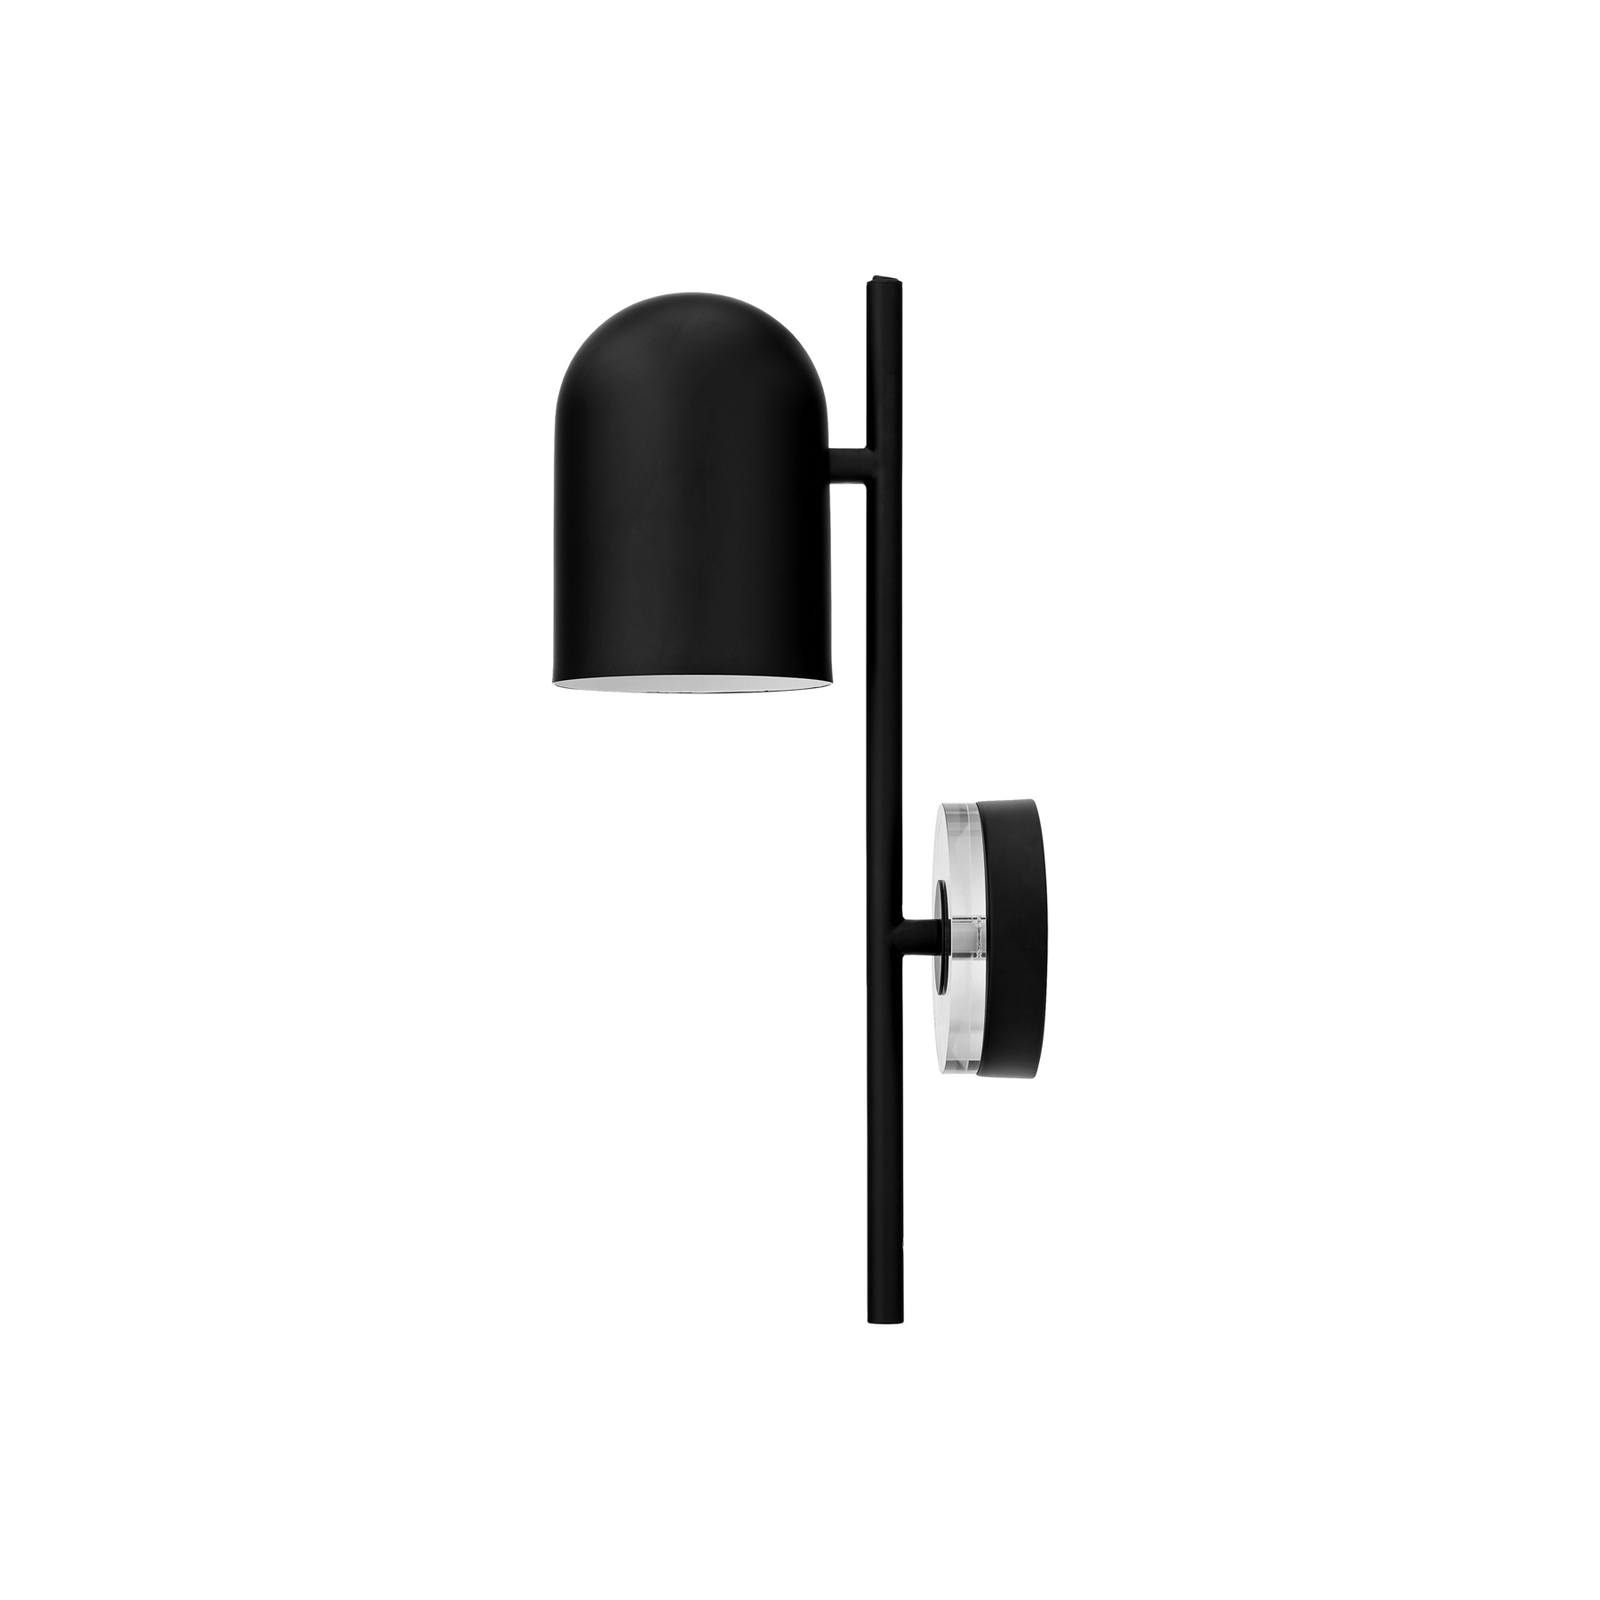 AYTM Luceo wall light, black, with plug